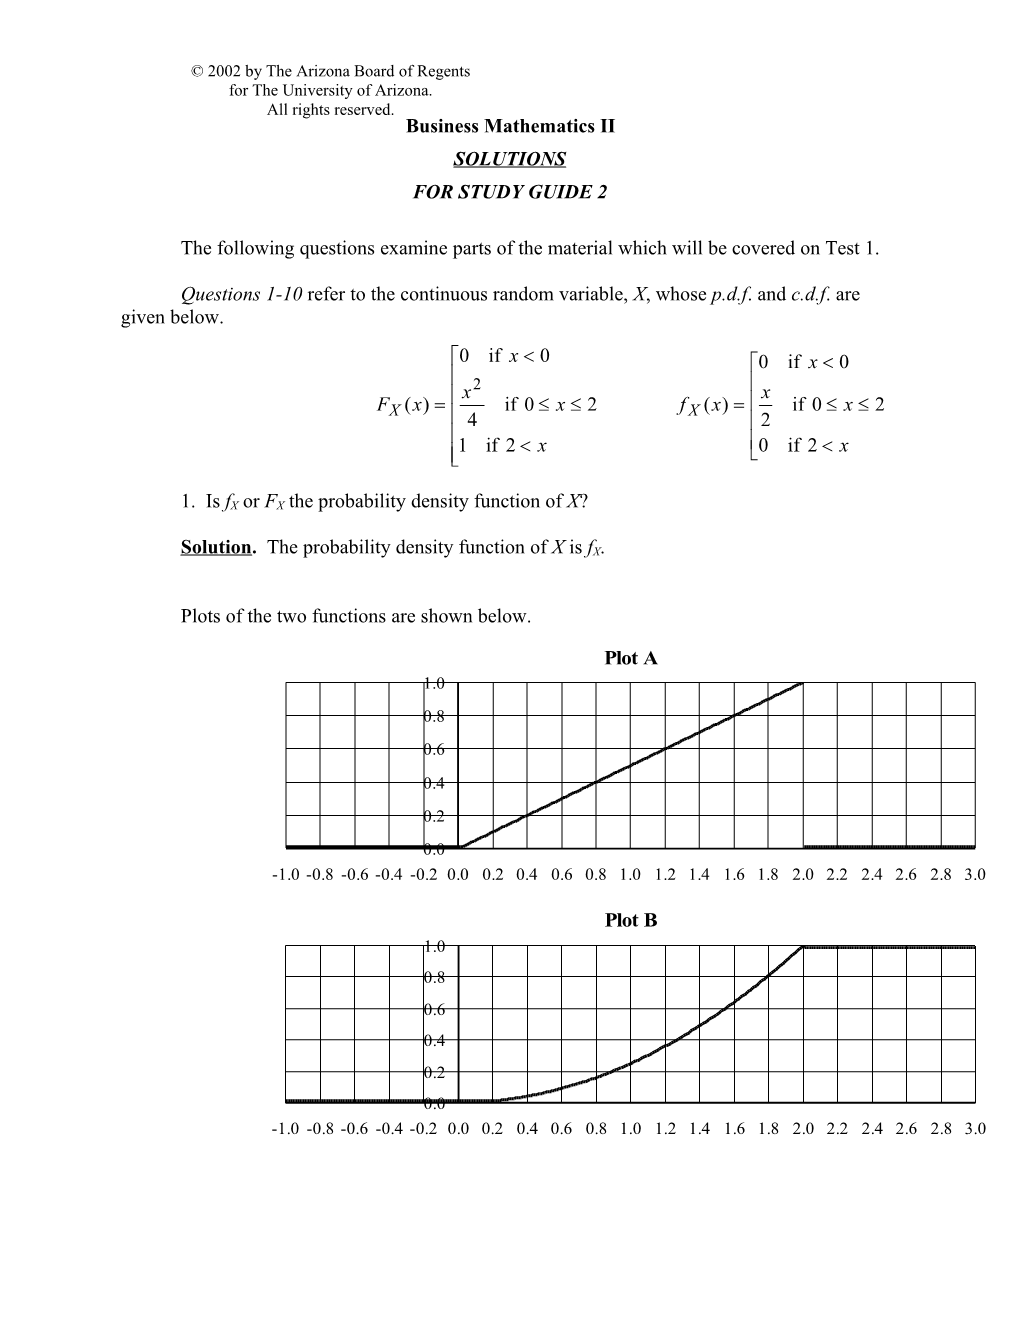 Solutions for Study Guide for Business Mathematics II, Test 2: Page 1